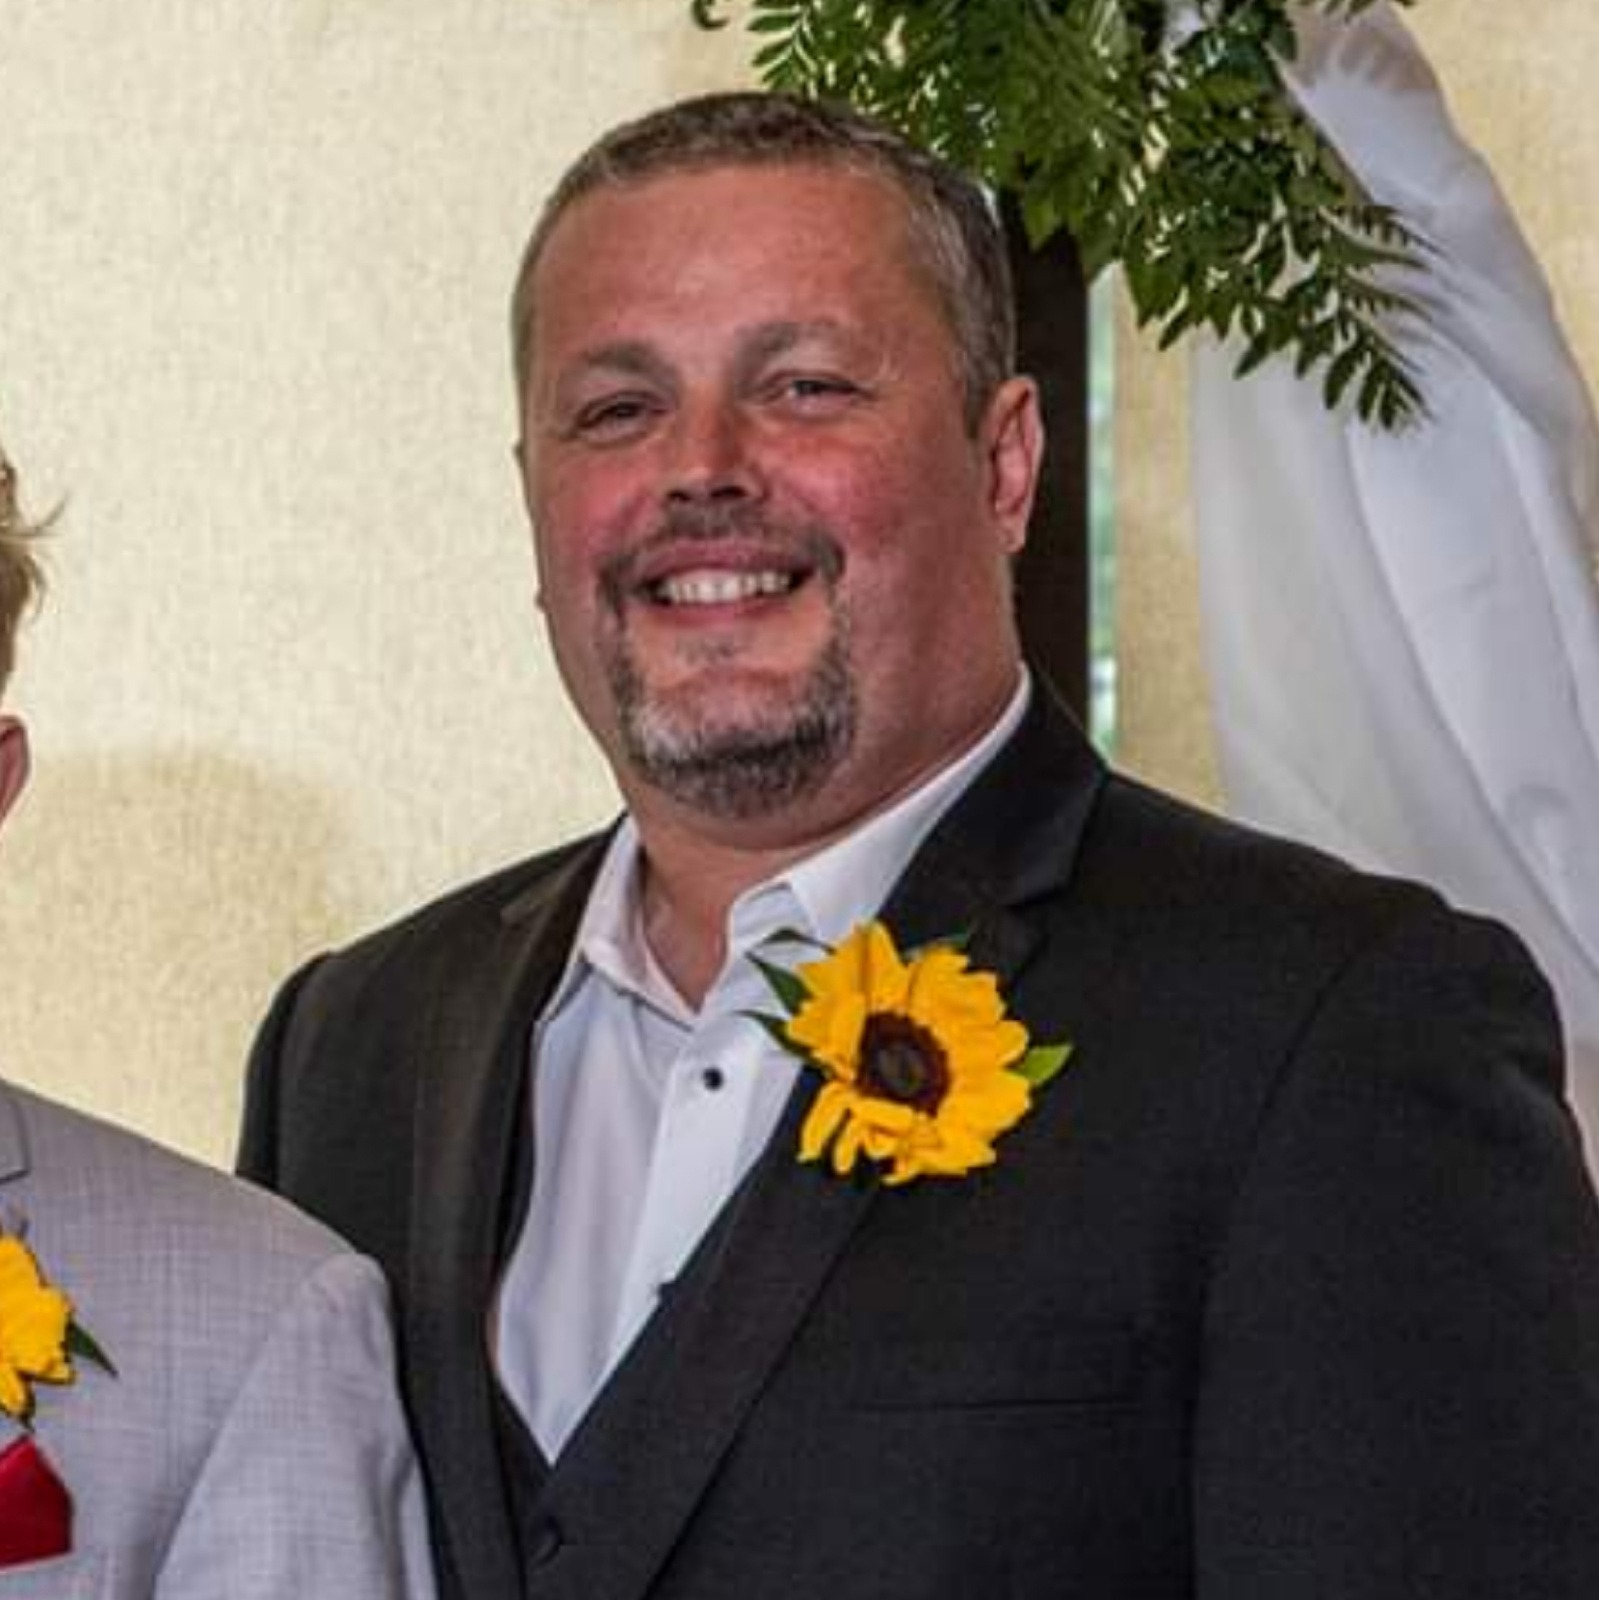 October 5, 2019 - All smiles and one proud papa, Tad's wedding day!